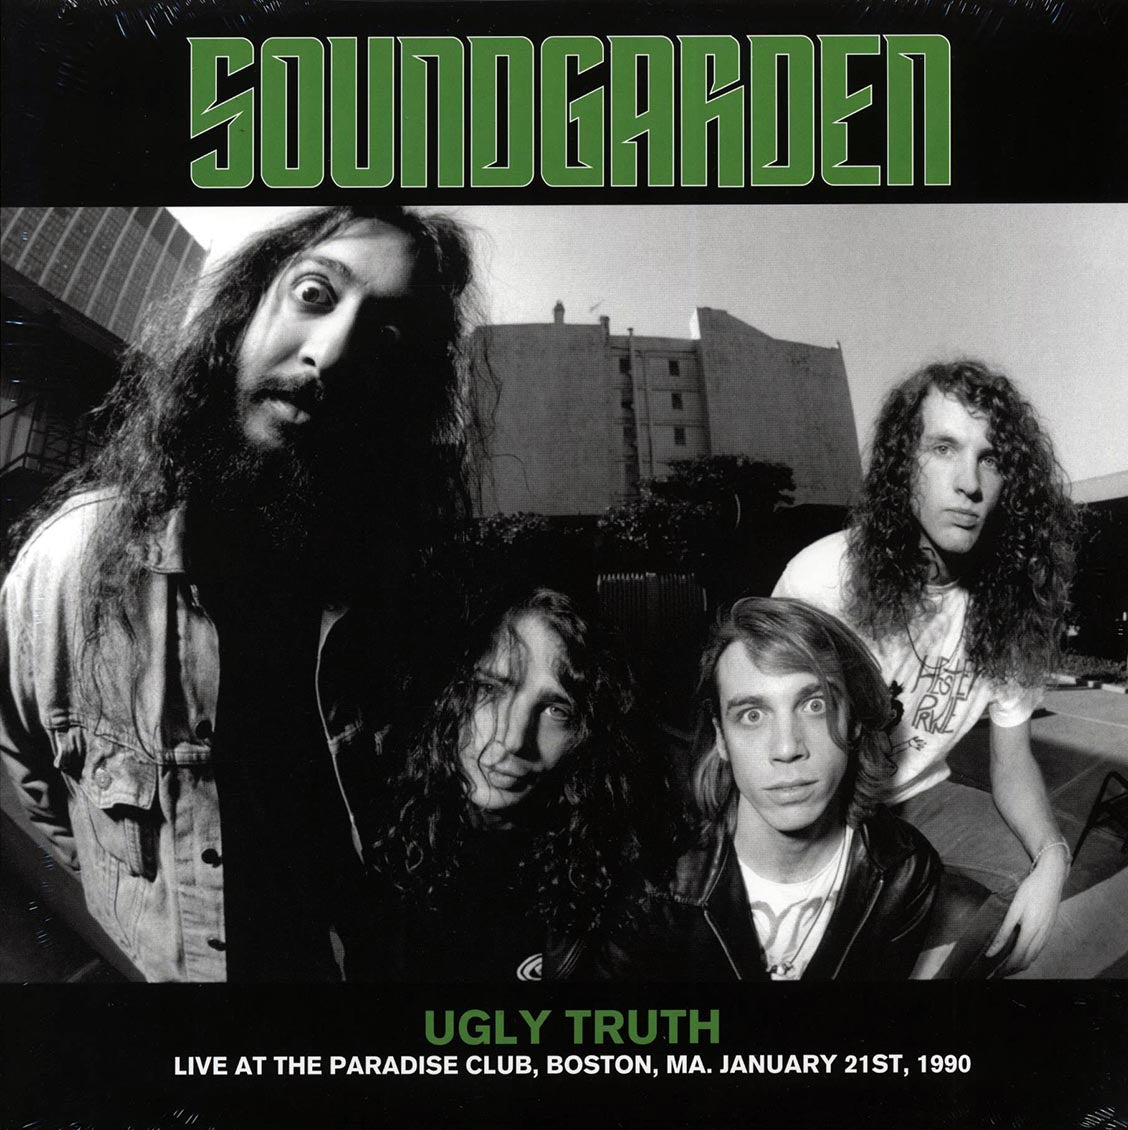 Soundgarden - Ugly Truth: Live At The Paradise Club, Boston, MA January 21st, 1990 (ltd. 500 copies made) - Vinyl LP